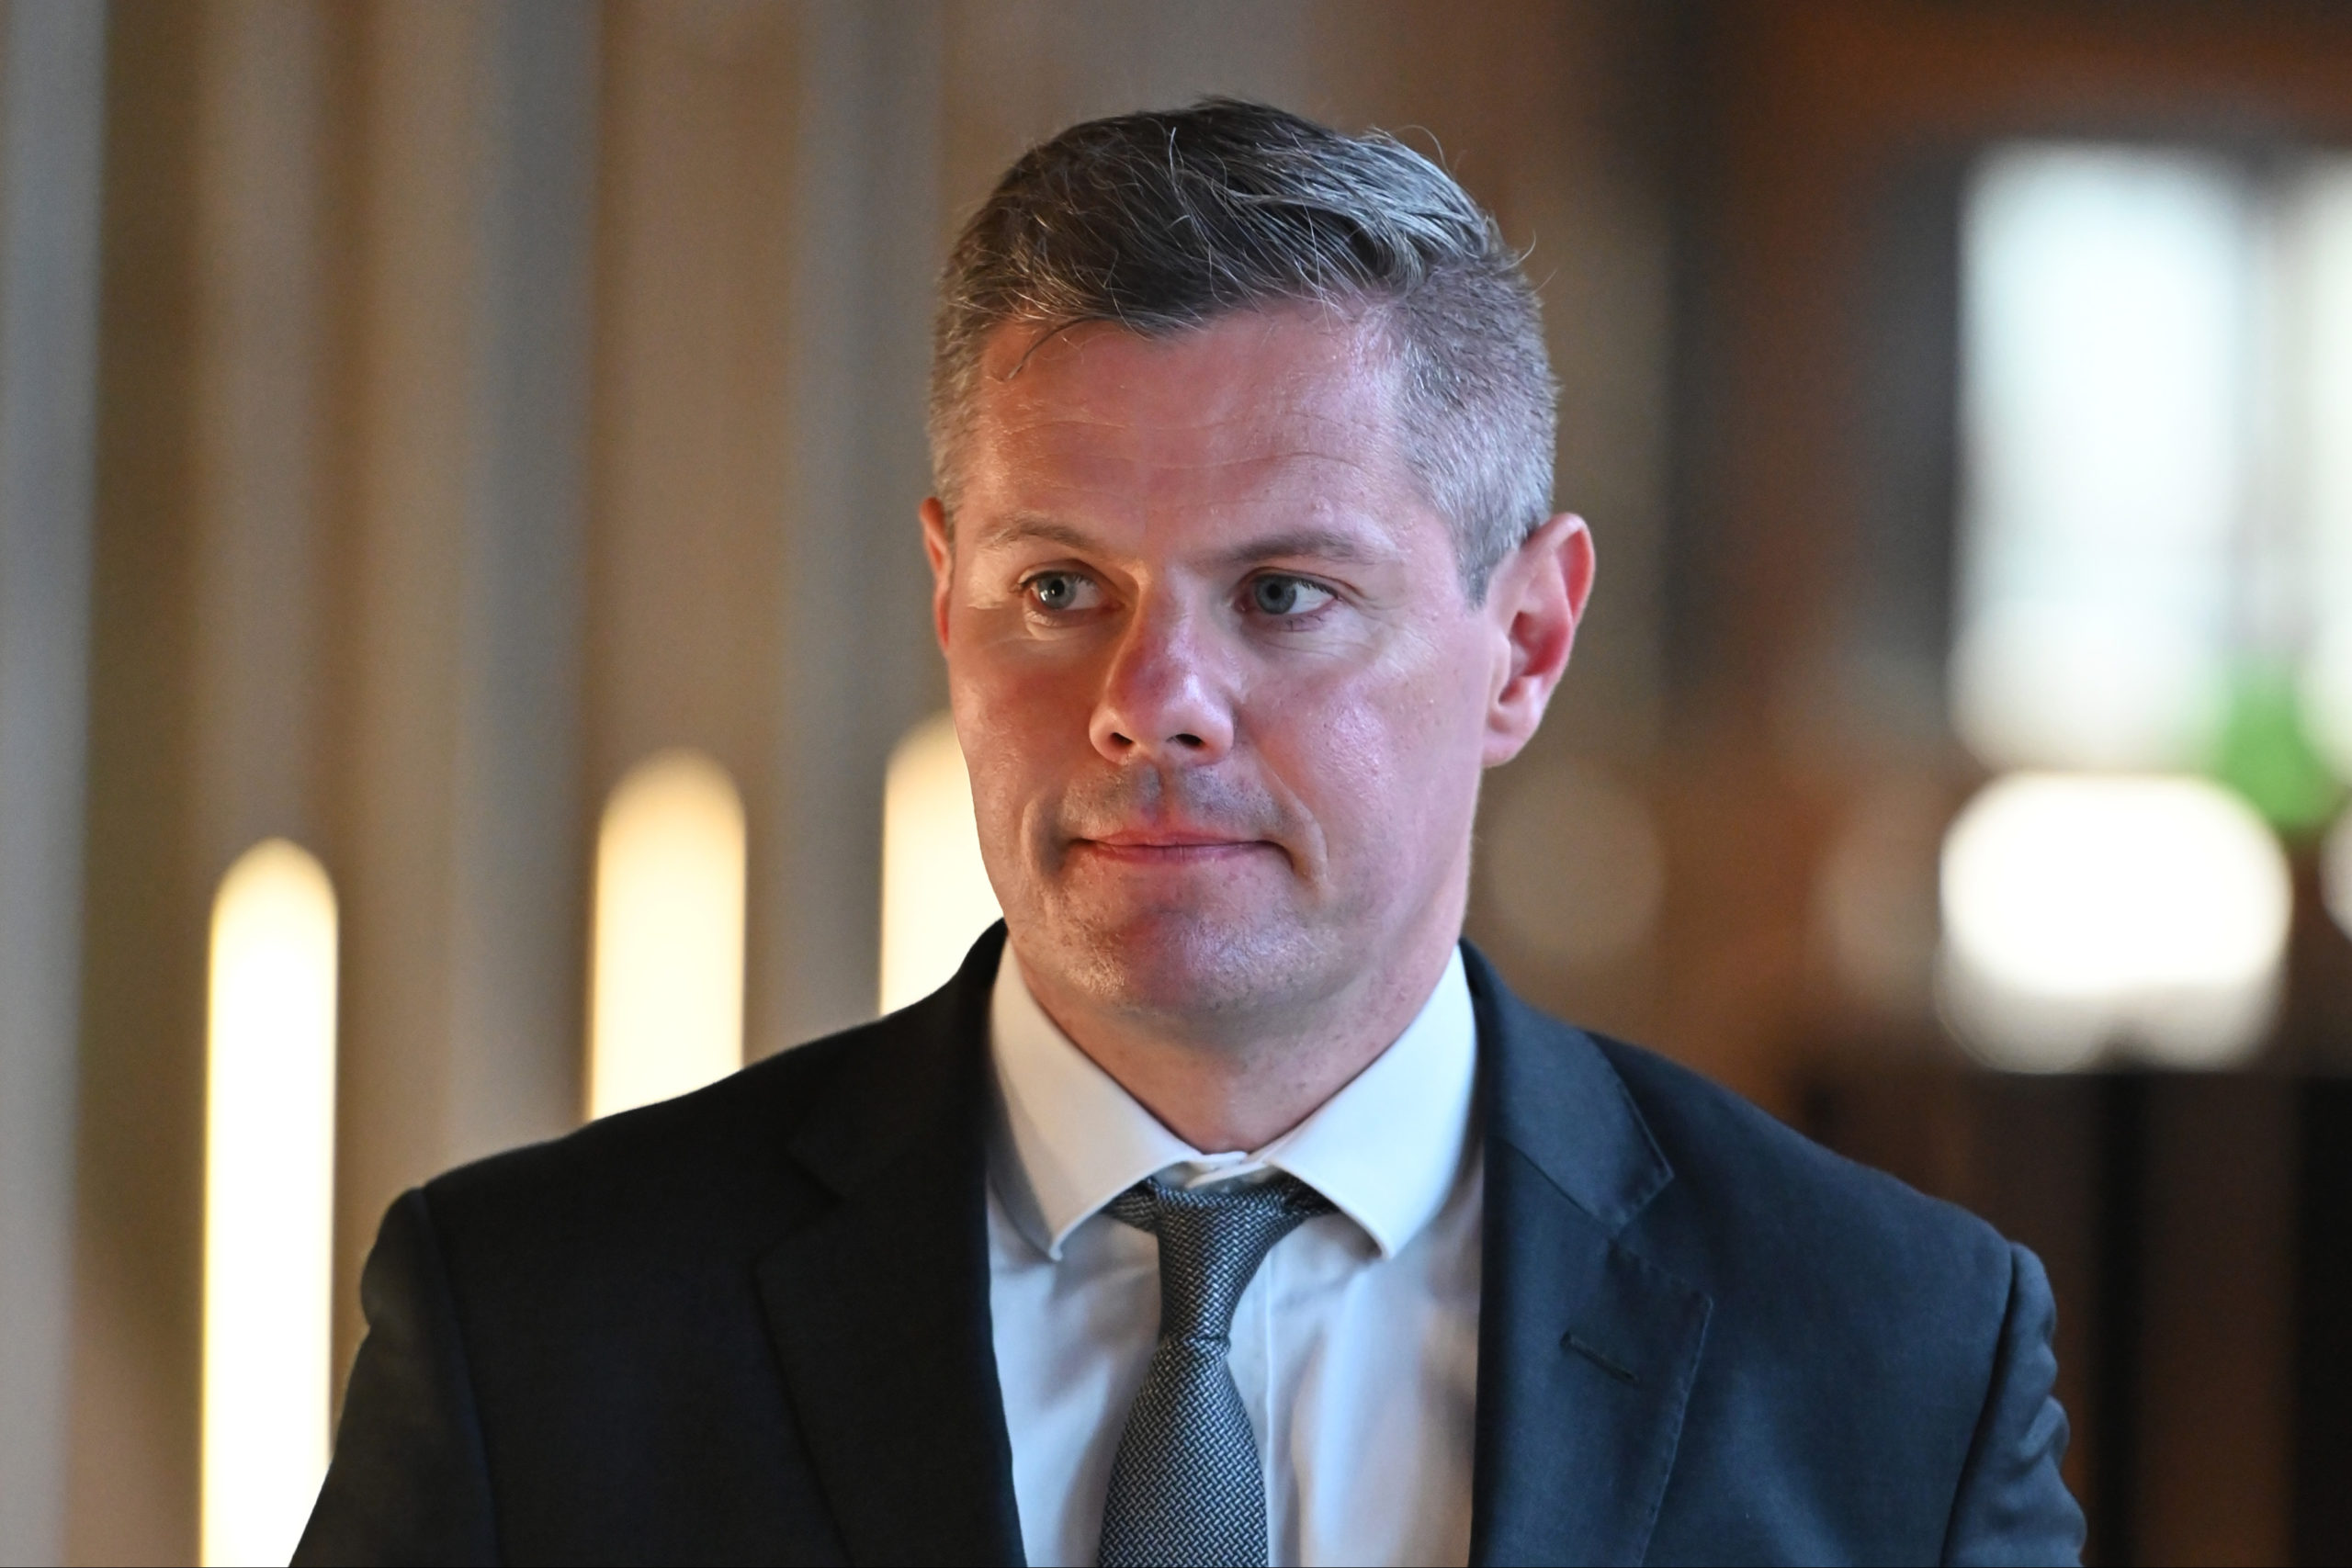 Derek MacKay is likely to give evidence to a parliament committee.